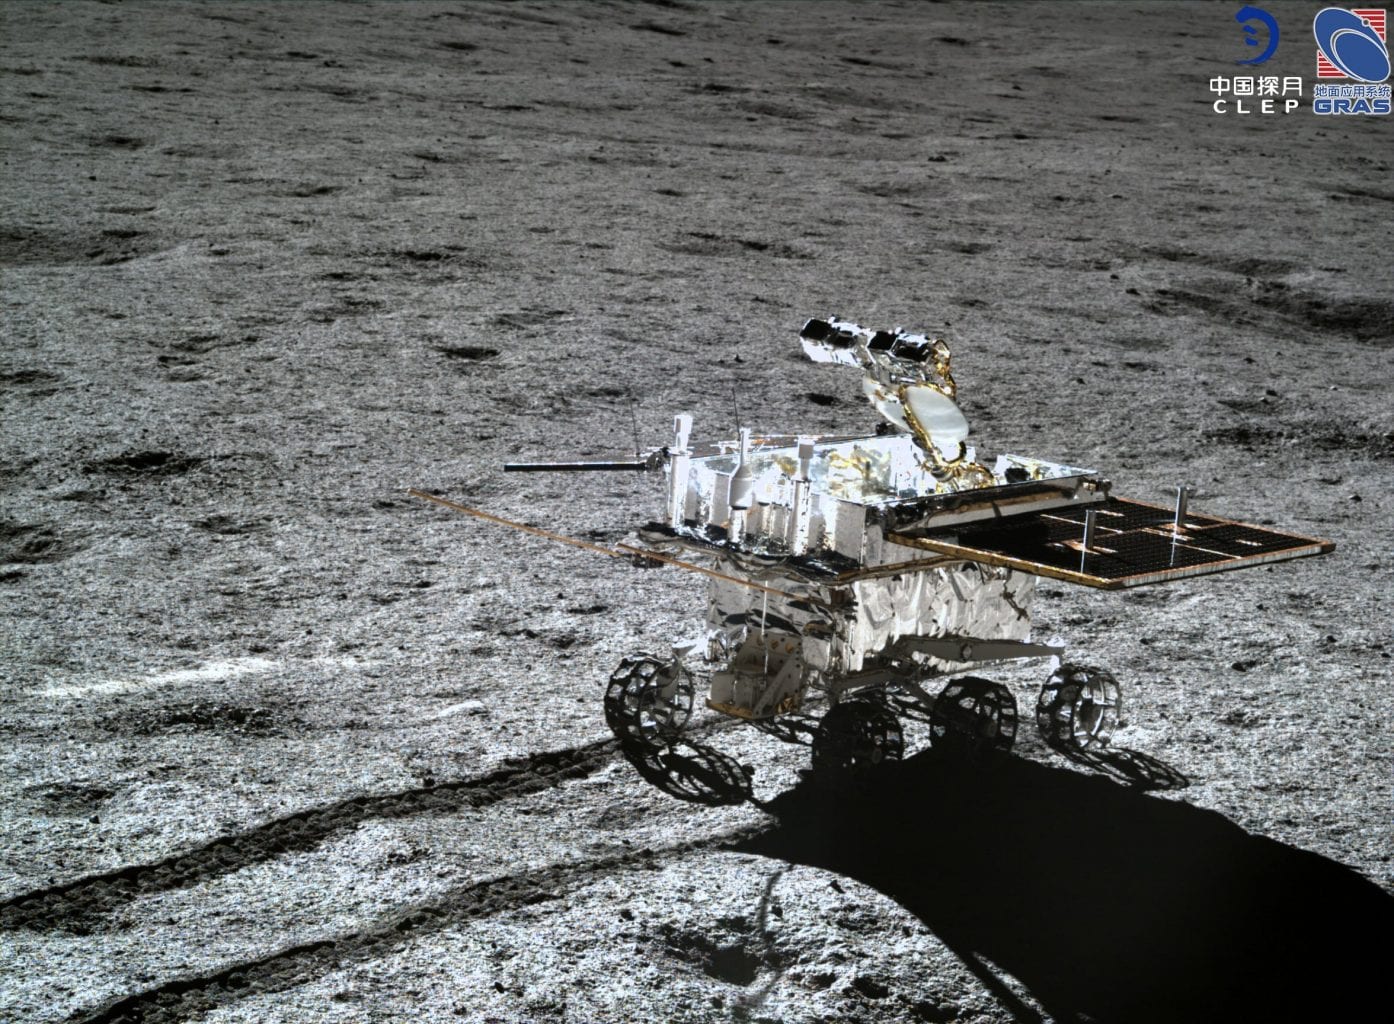 Image of the patrol unit on its way to point D. Credit: CLEP/ Lunar and Planetary Multimedia Database